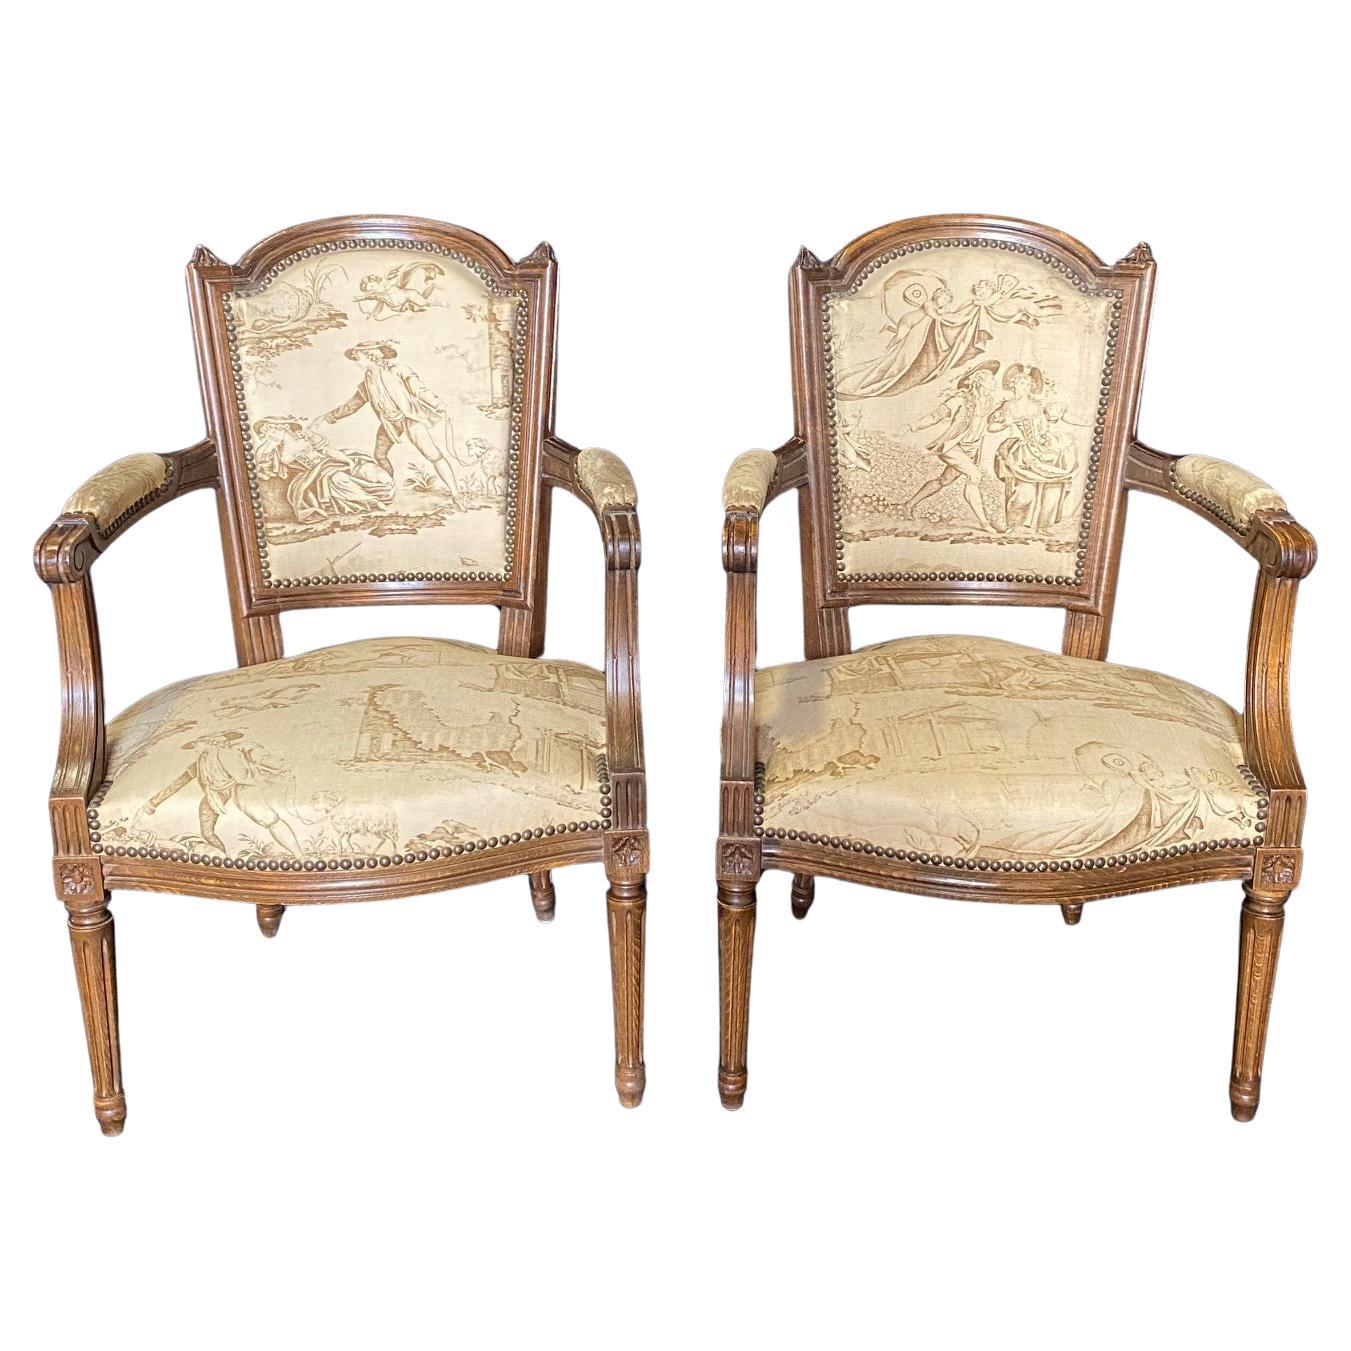  Pair of French 19th Century Walnut & Toile Louis XVI Fauteuils  For Sale